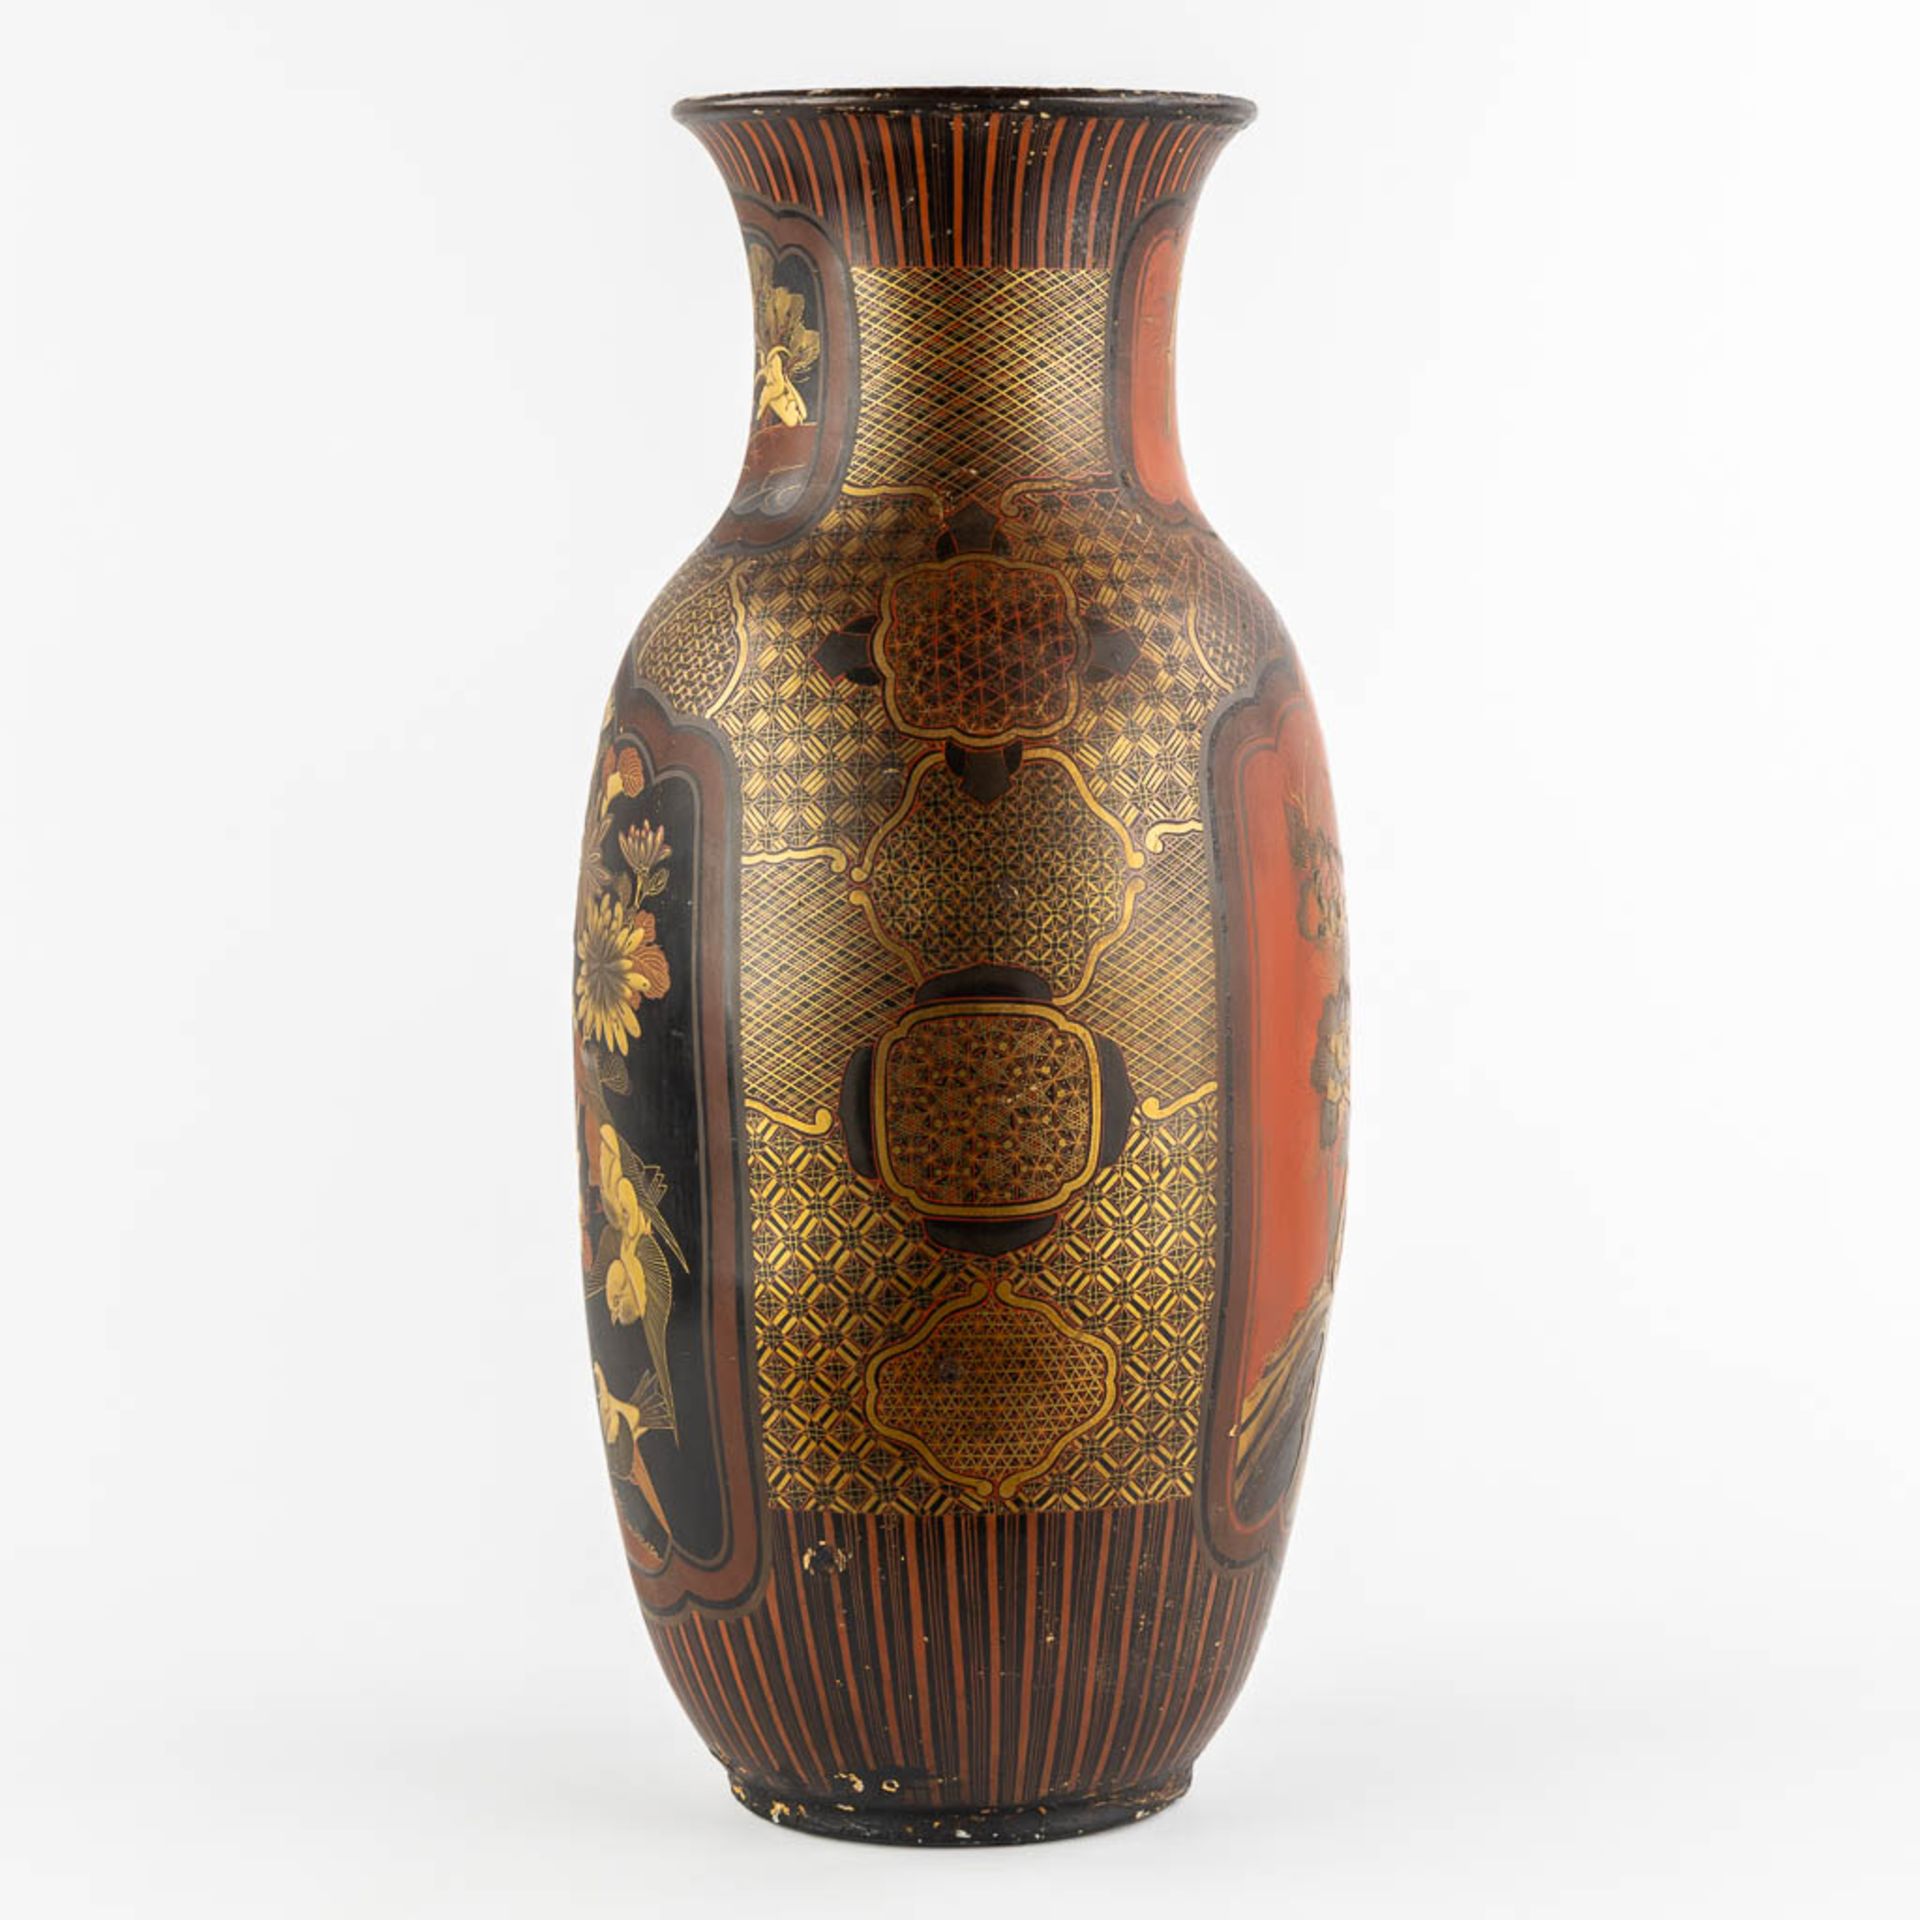 A Japanese porcelain vase, finished with red and gold lacquer. Meij period. (H:61 x D:27 cm) - Bild 4 aus 14